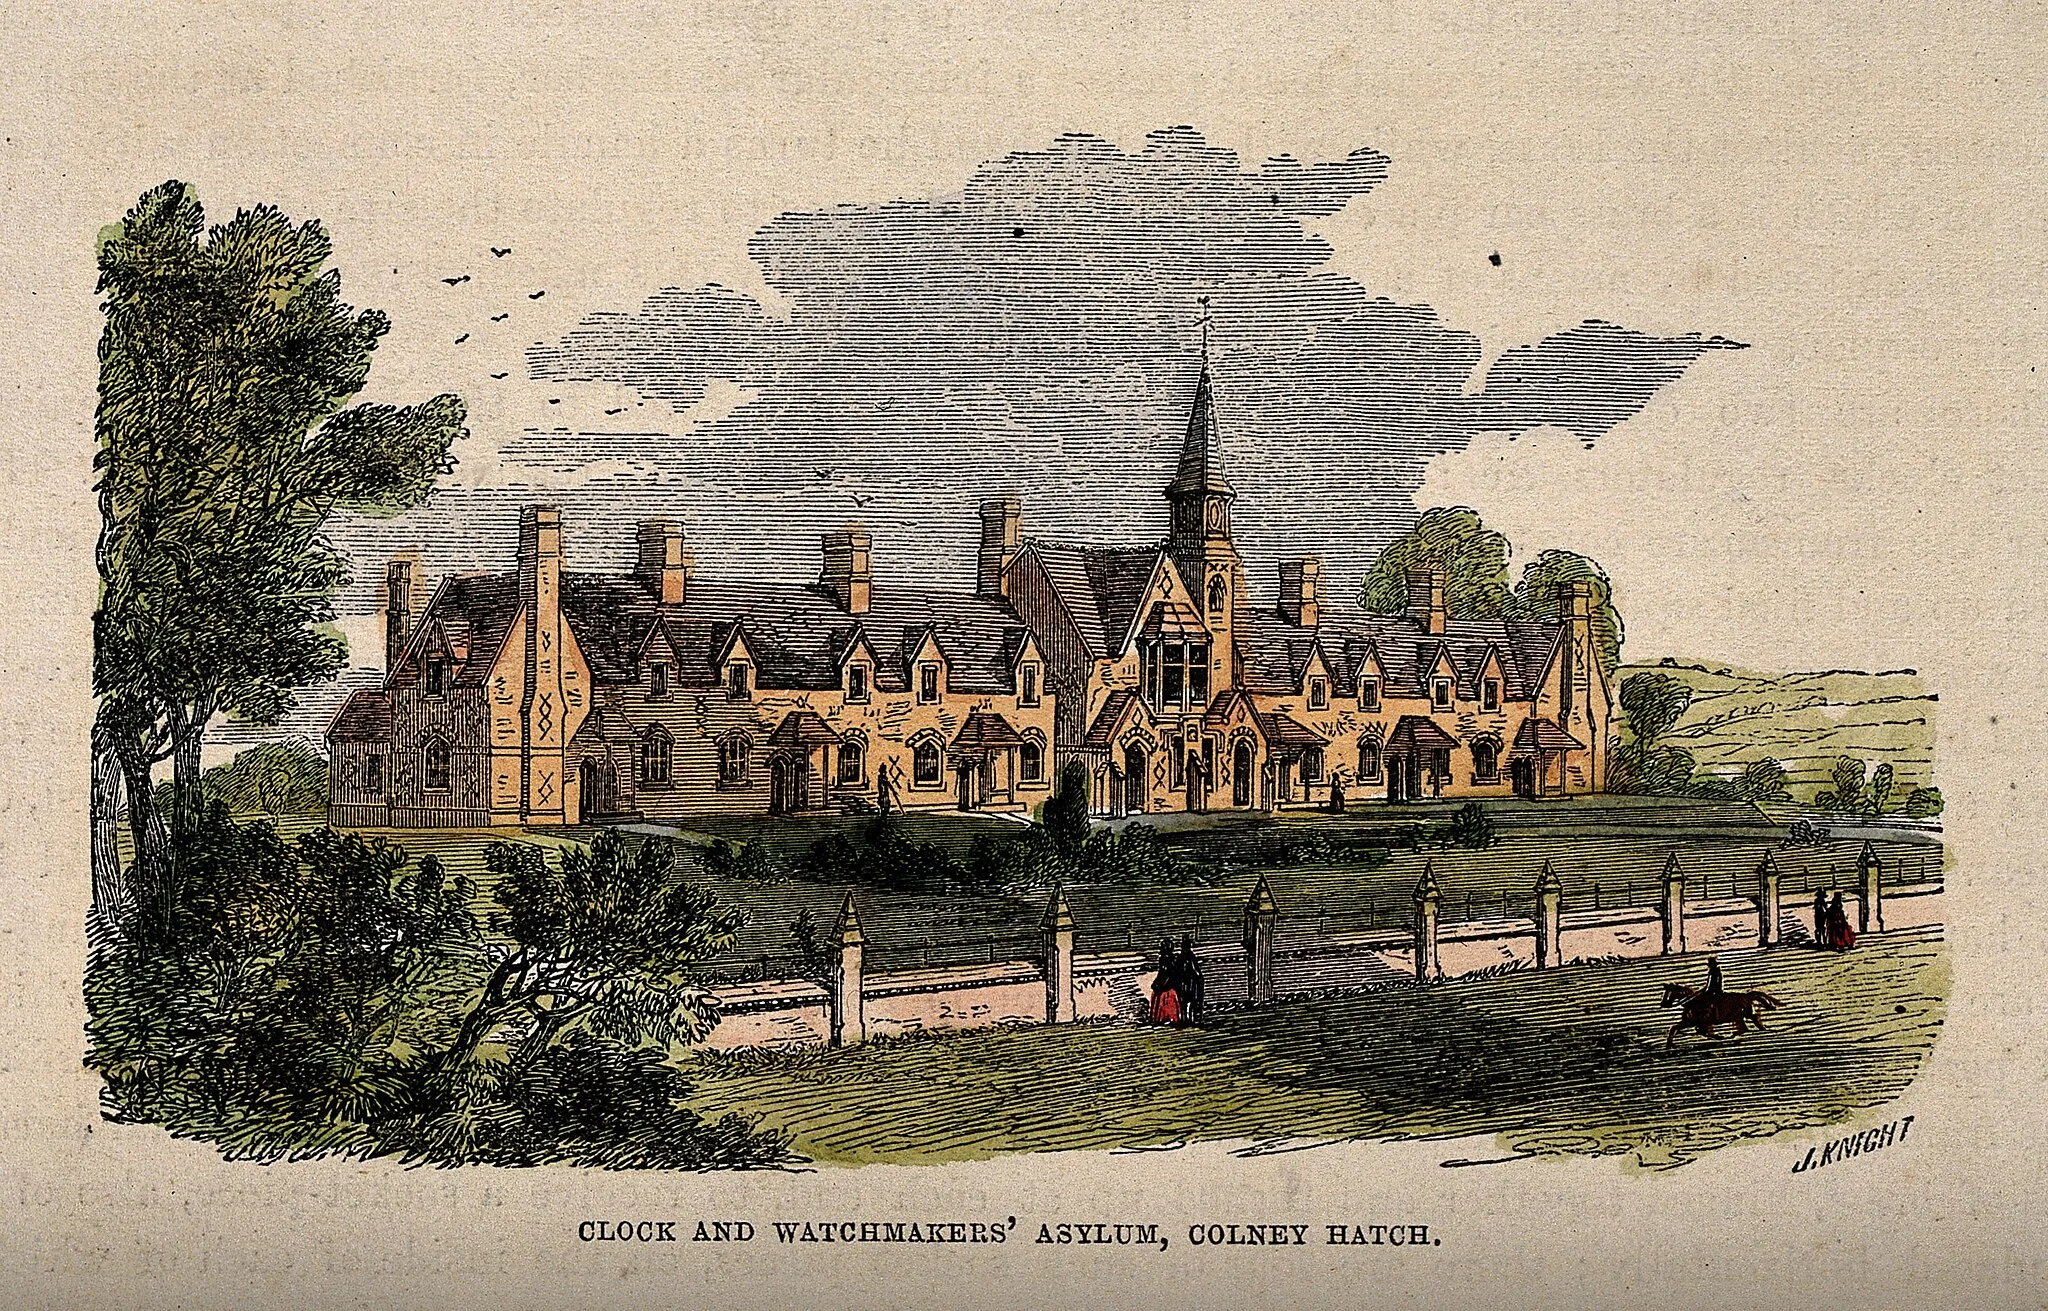 Photo showing: Clock and Watchmakers Asylum, Colney Hatch, Southgate, Middlesex: panoramic view. Coloured wood engraving by J. Knight.

Iconographic Collections
Keywords: J. Knight